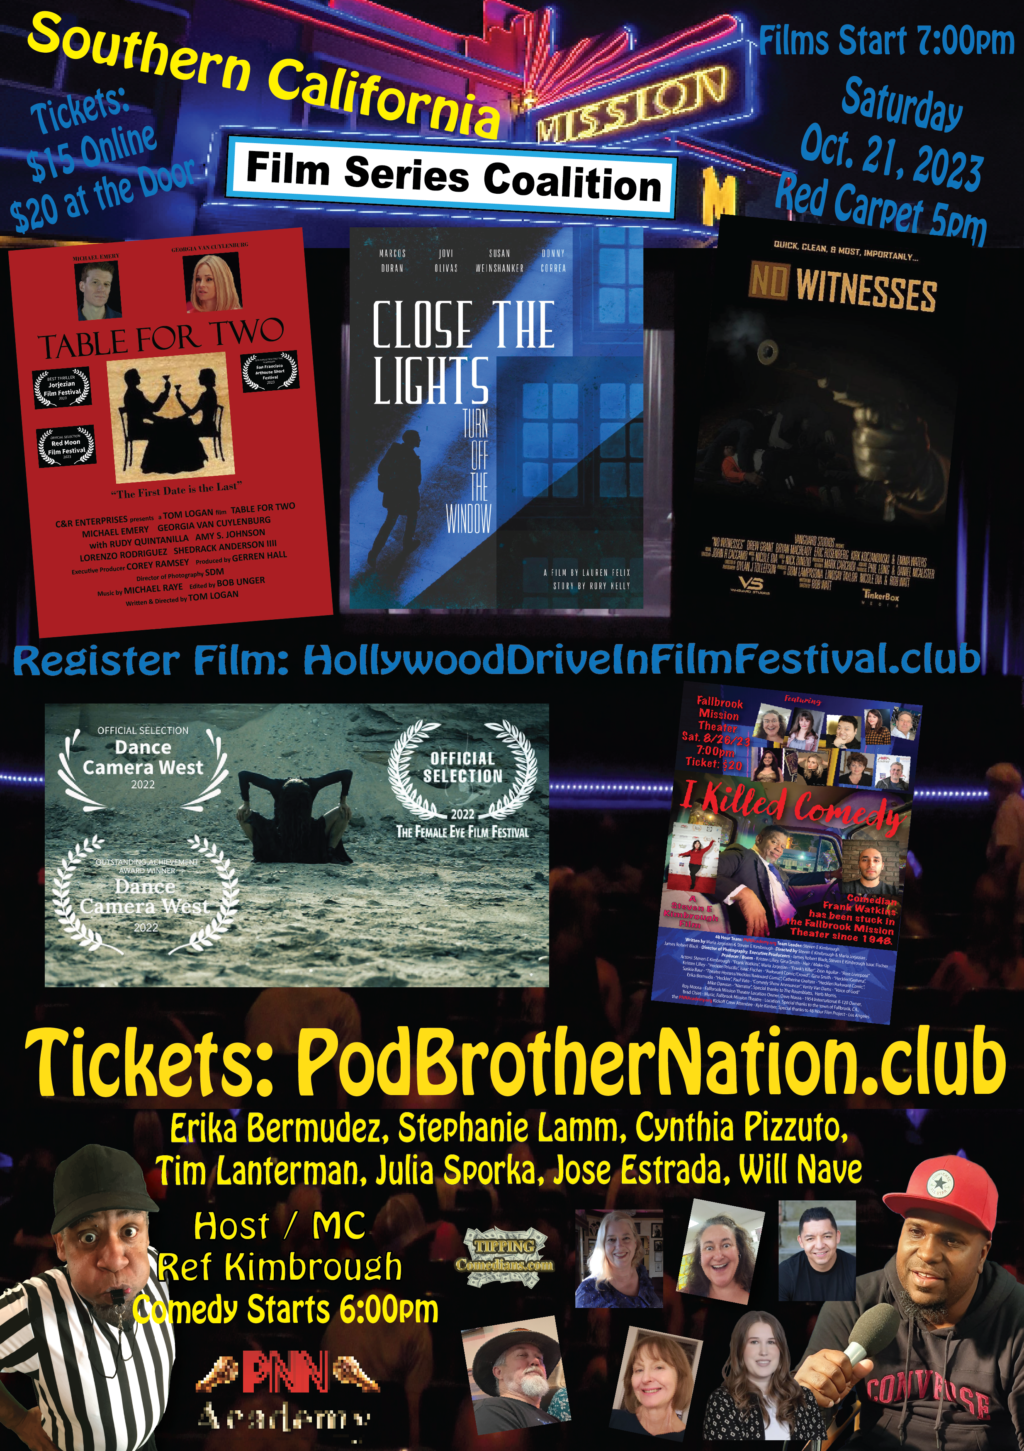 Southern California Film Coalition Series Fallbrook Mission Theater